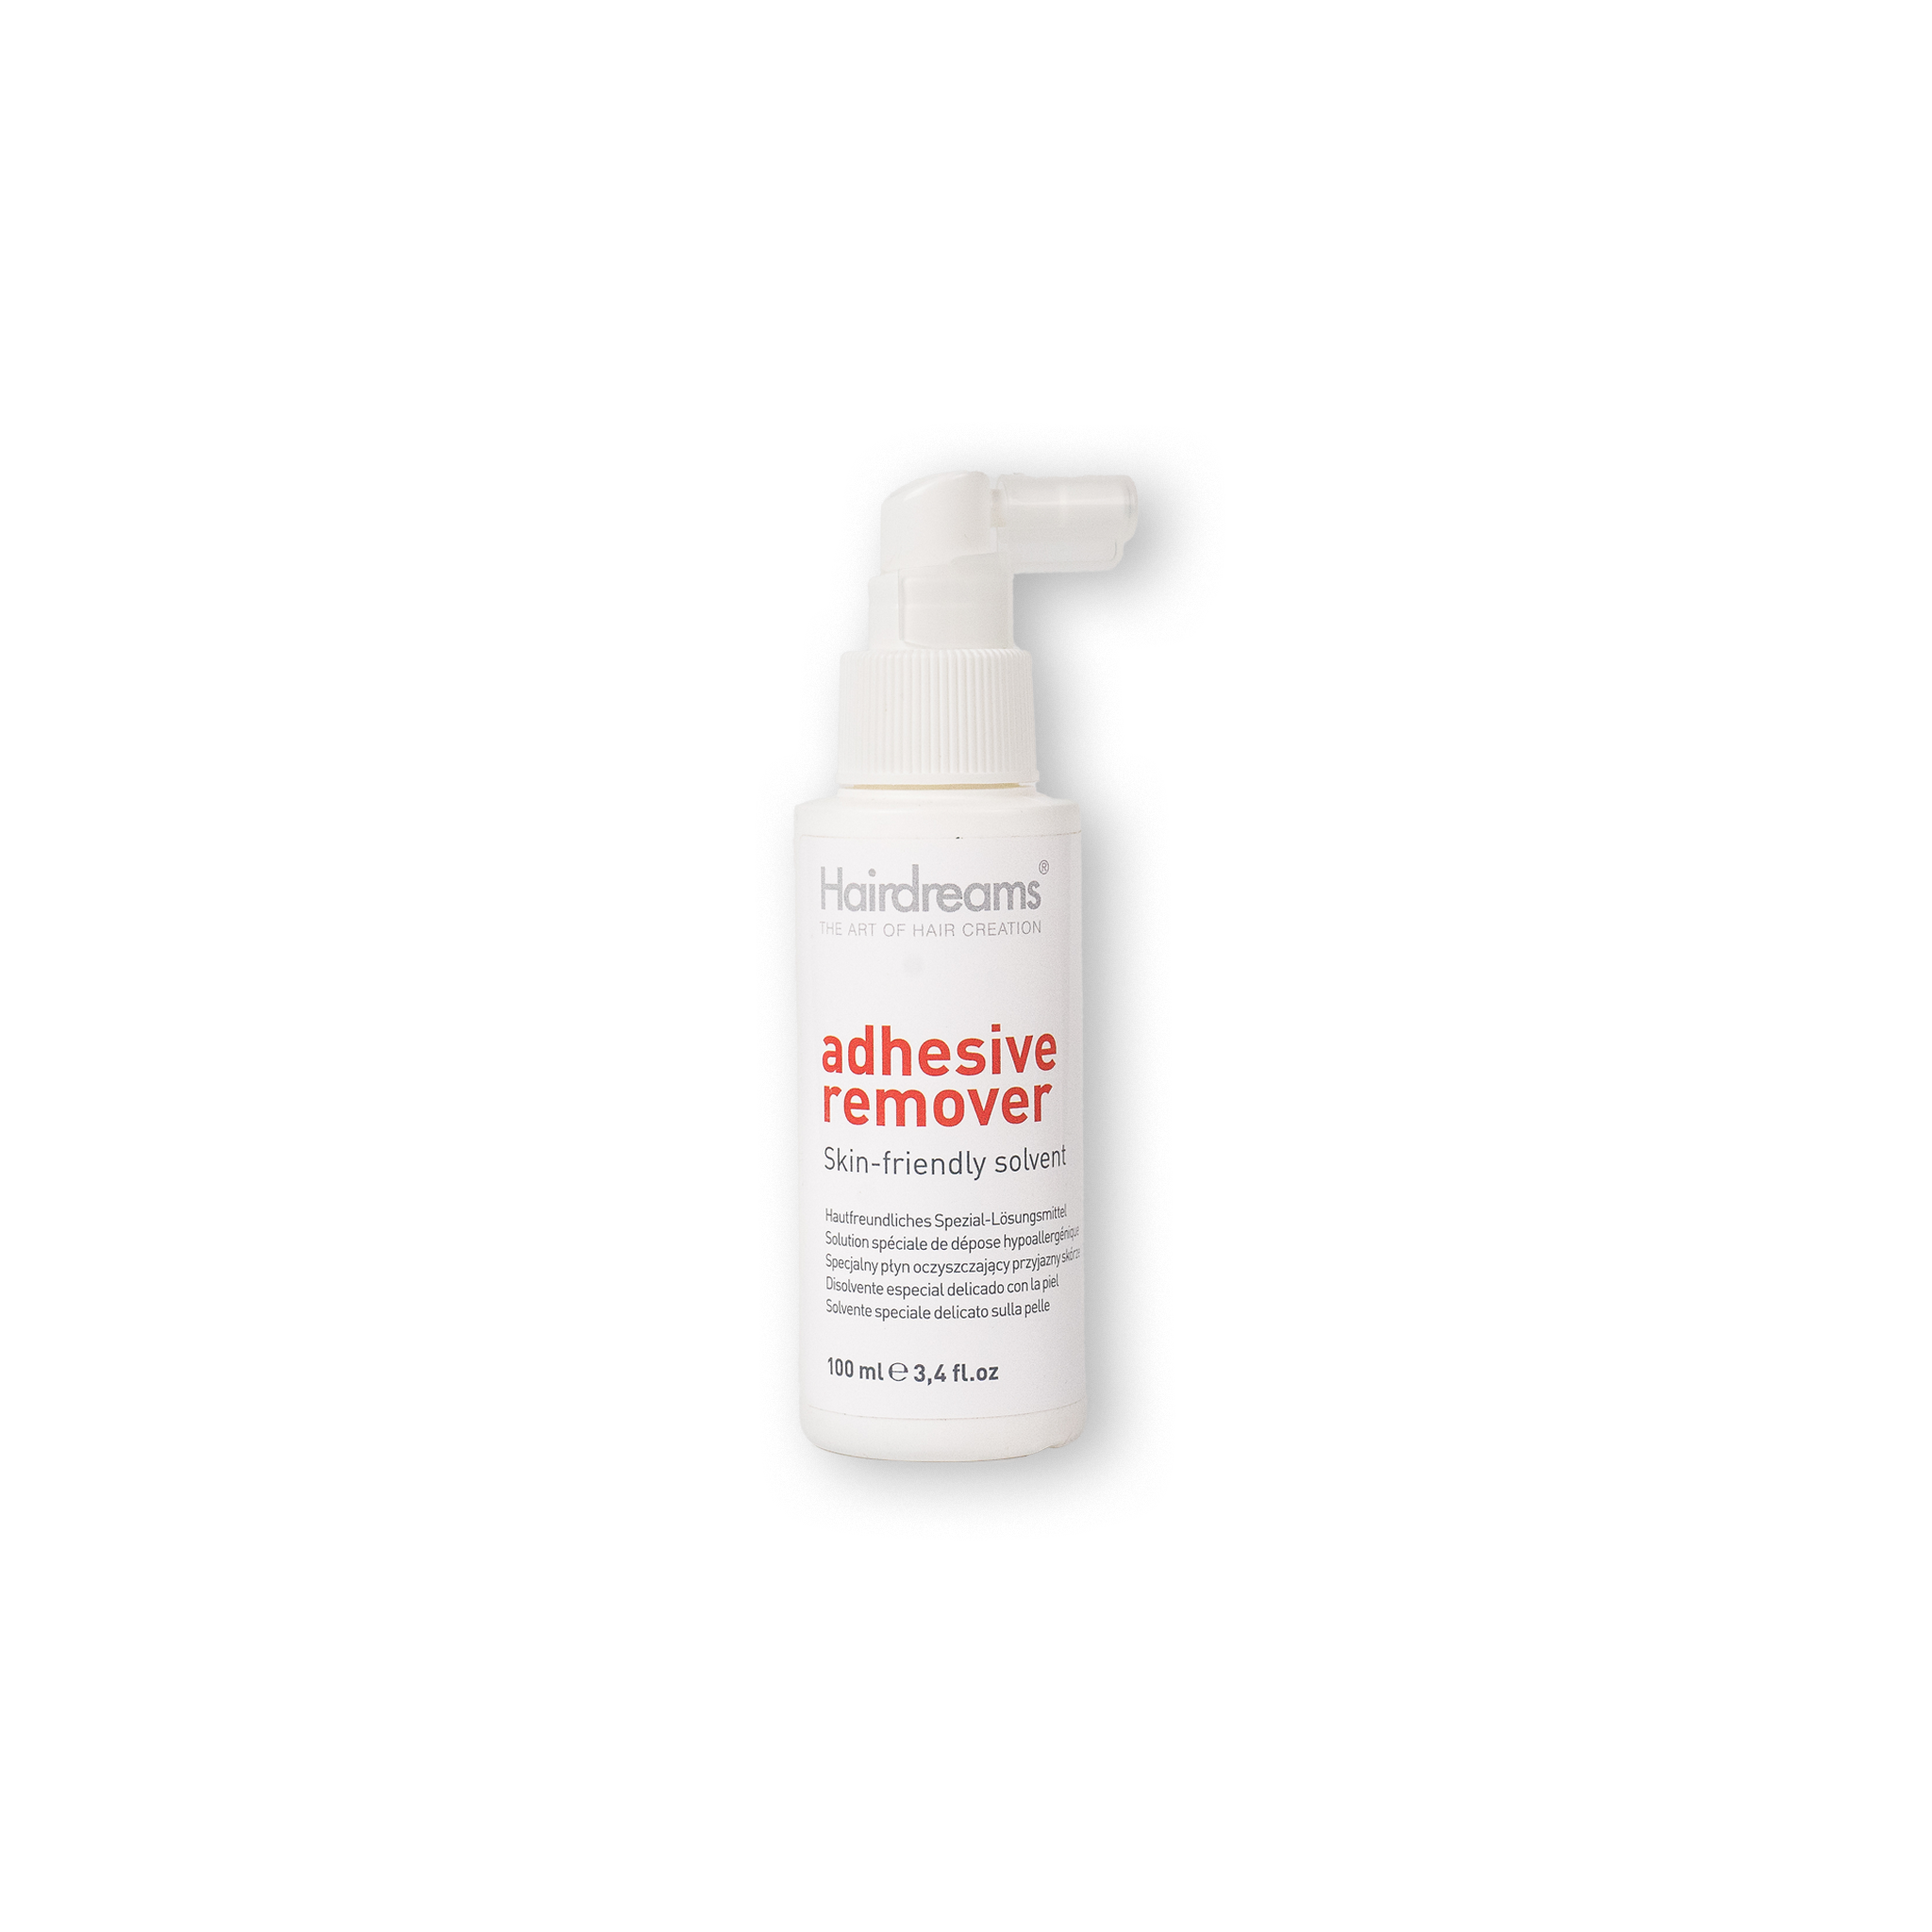 Microlines Adhesive Remover for removing adhesive residues - 100